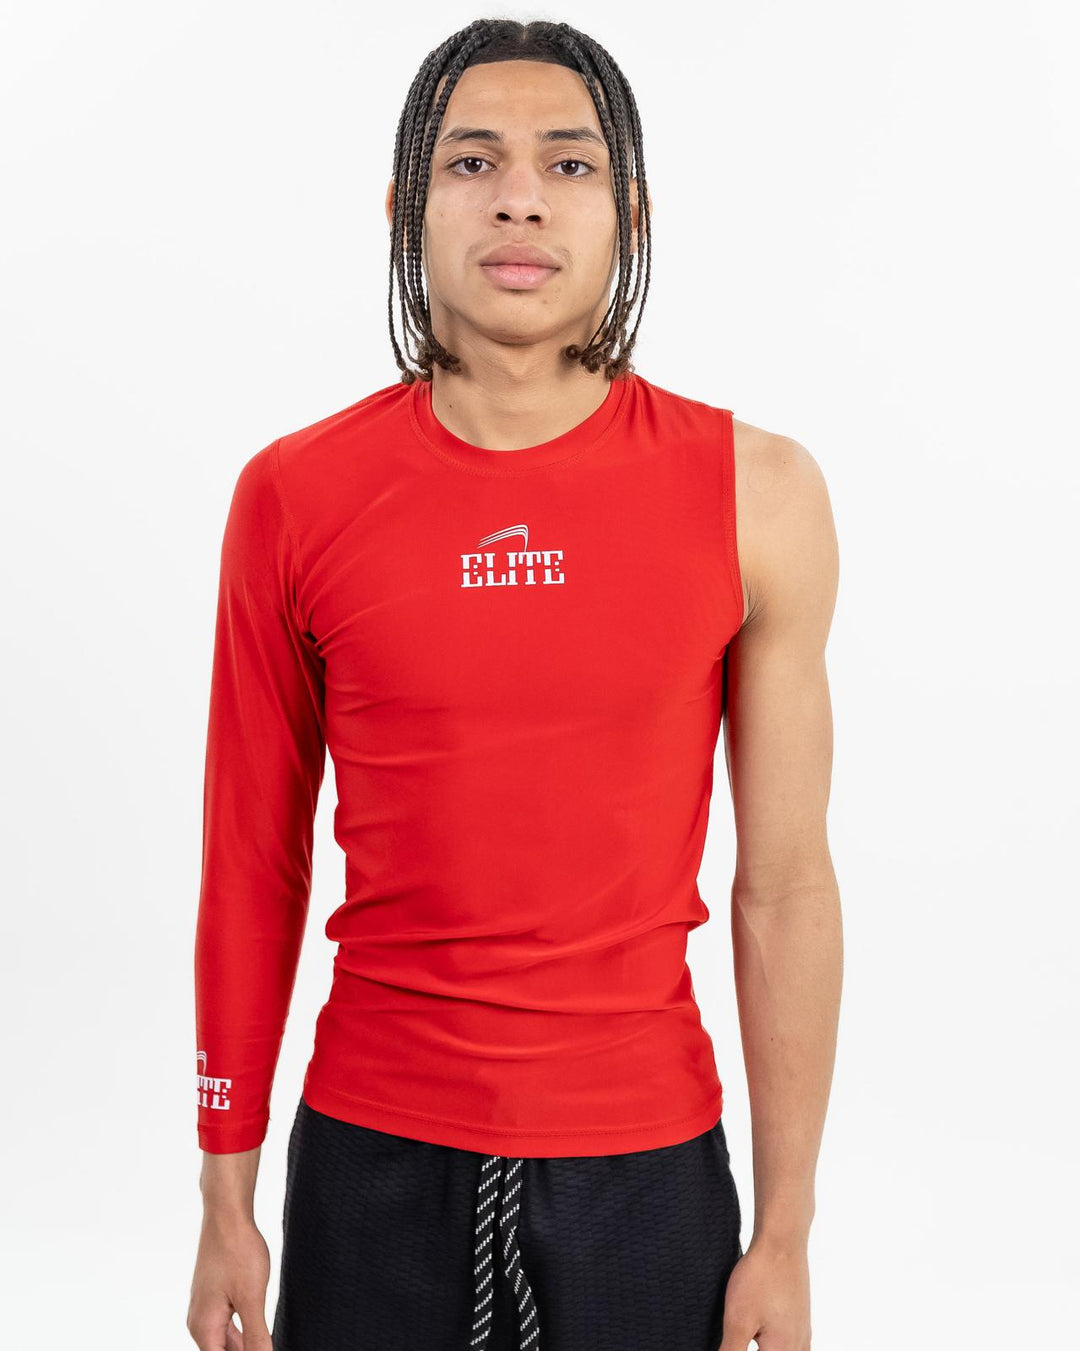 ELITE SINGLE ARM LONG SLEEVE COMPRESSION SHIRT - RED